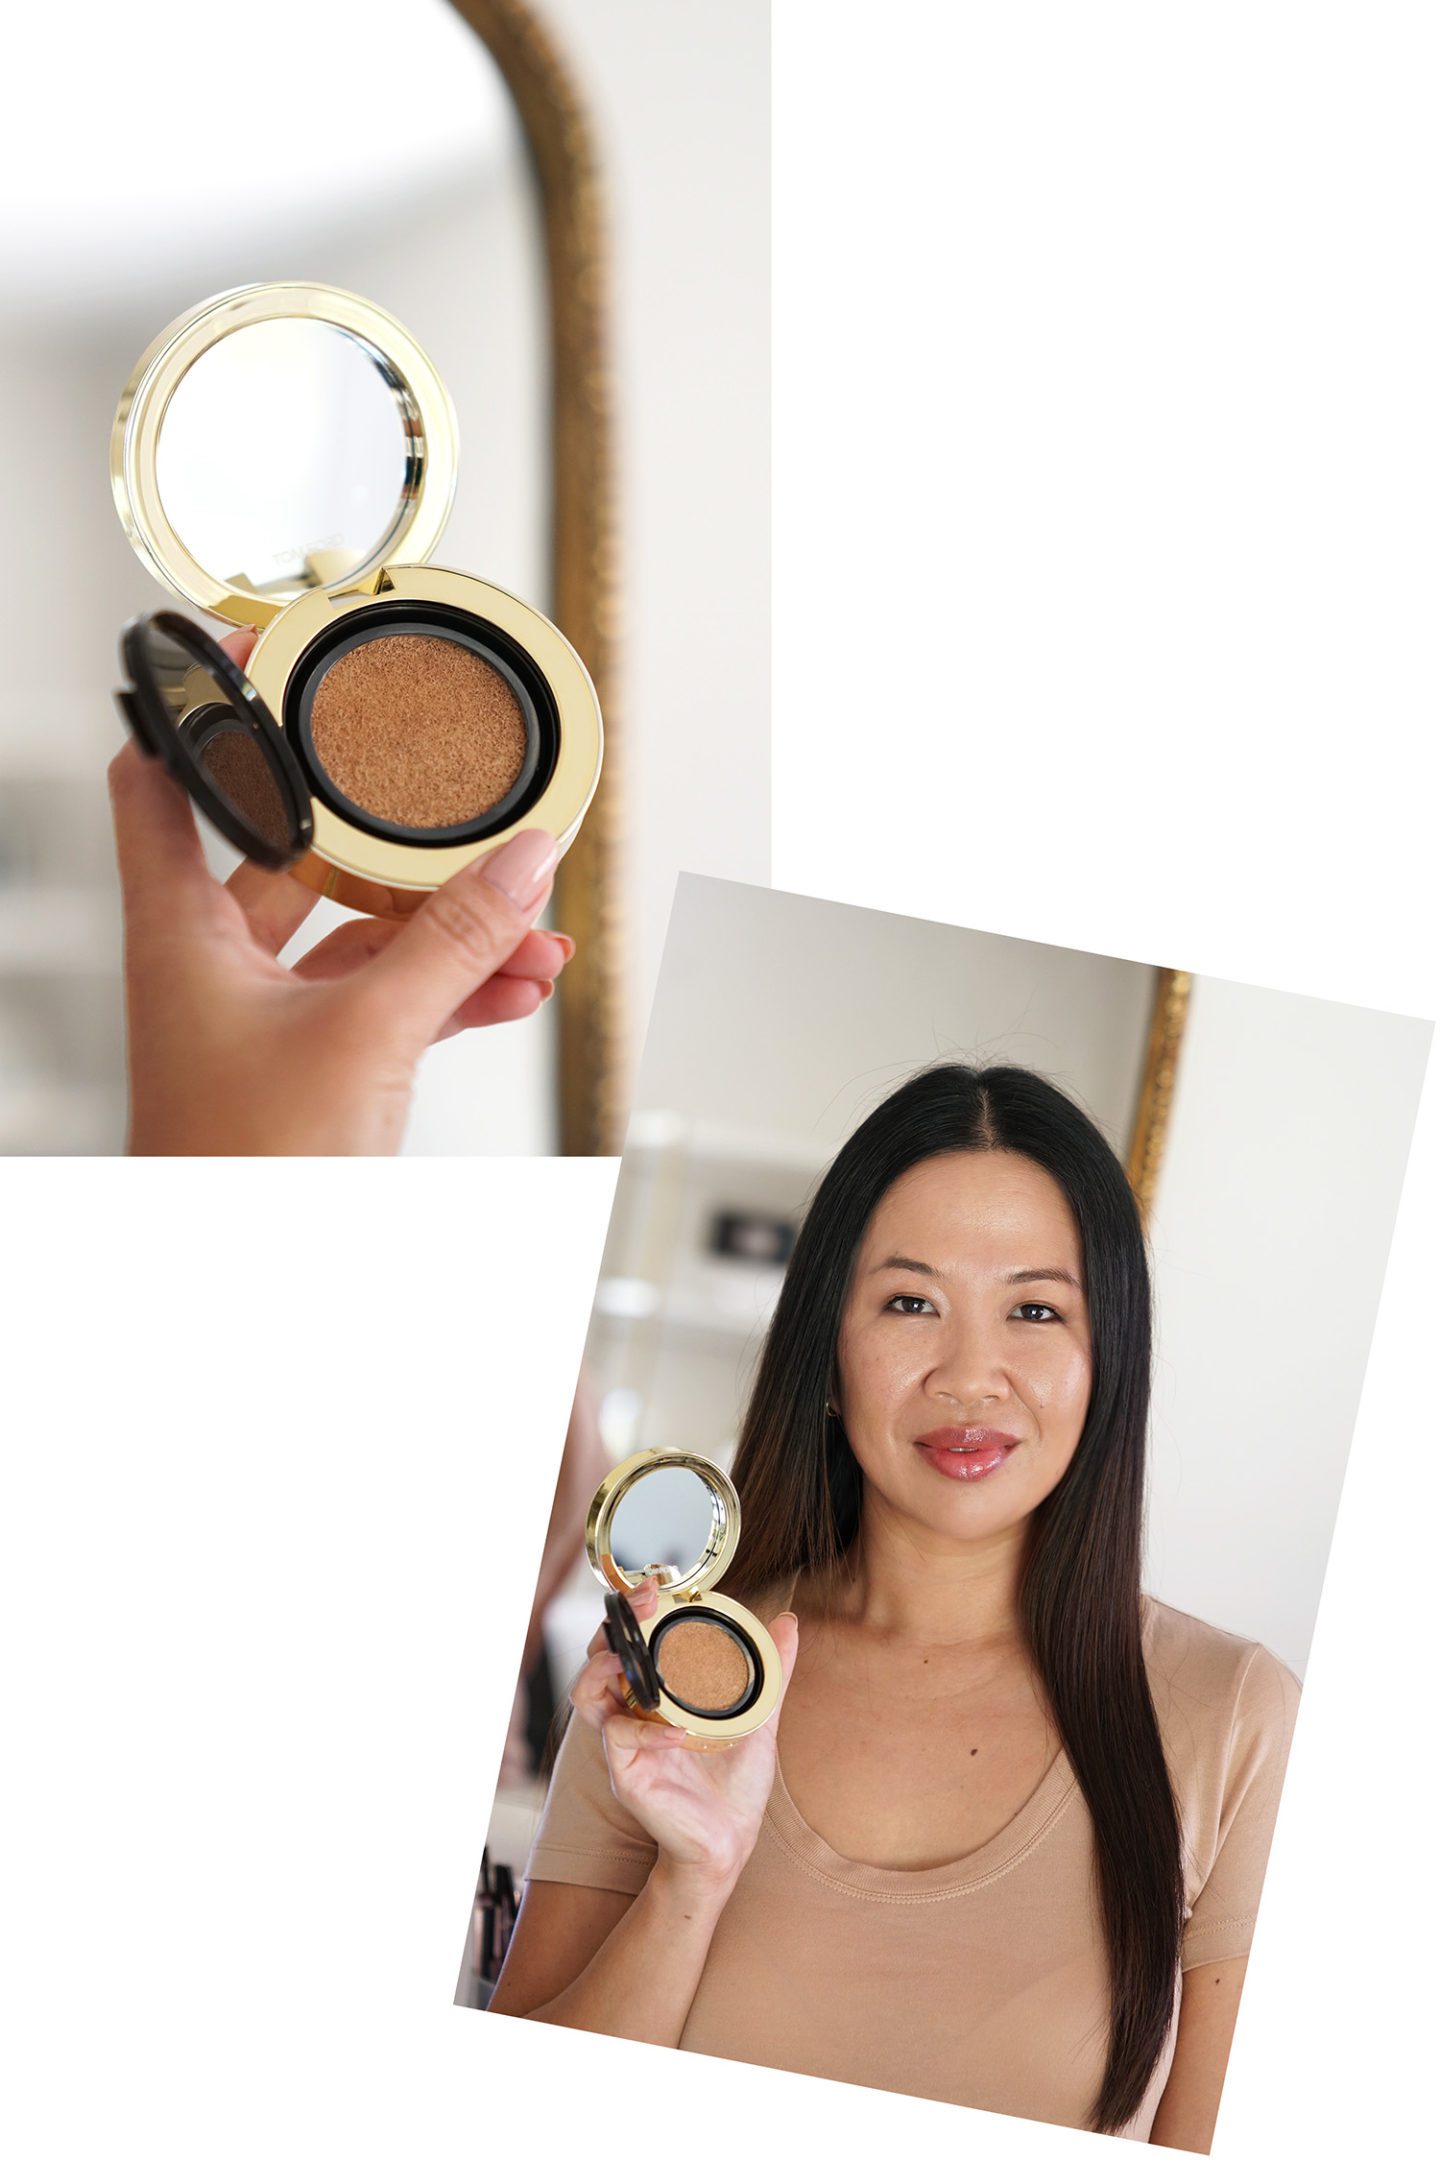 Tom Ford Shade and Illuminate Soft Radiance Cushion in Sable 6.5